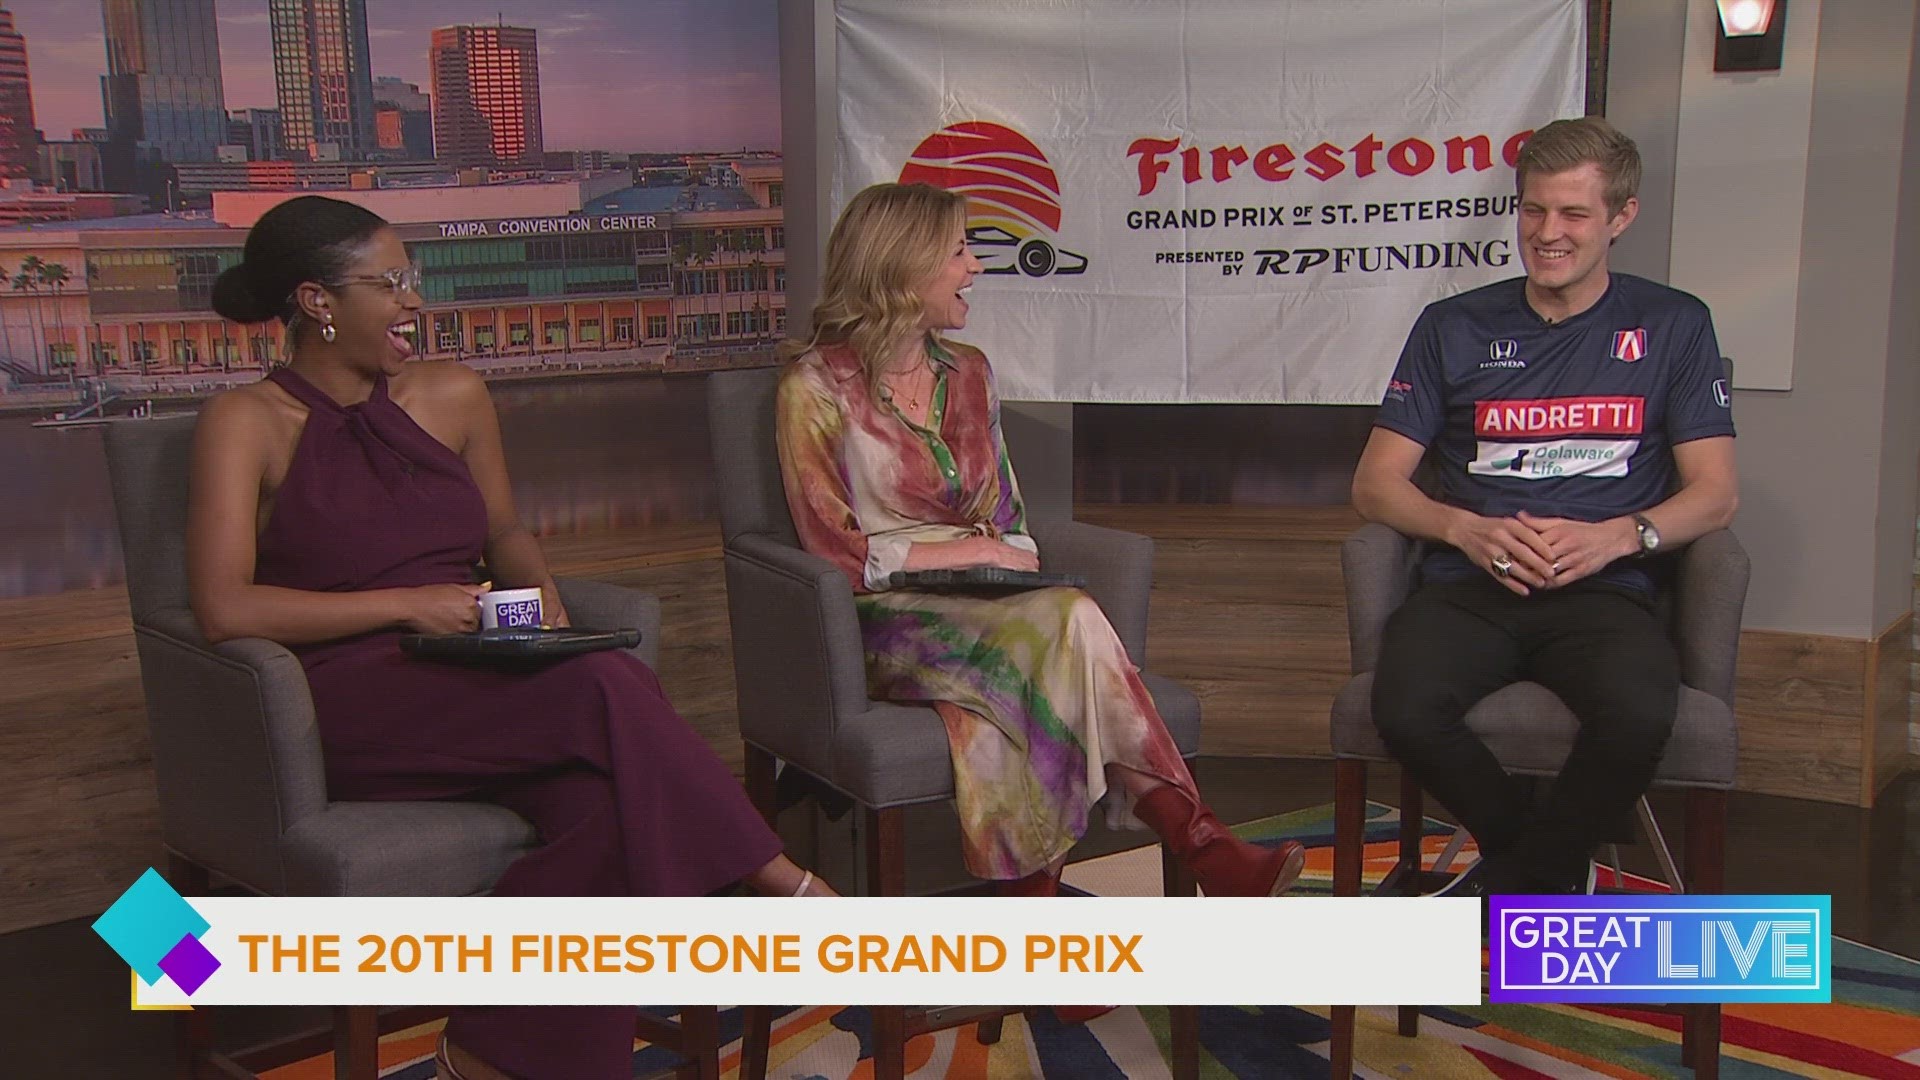 For the 20th year, the Firestone Grand Prix will twist and turn through the streets of St. Pete. For tickets visit www.gpstpete.com